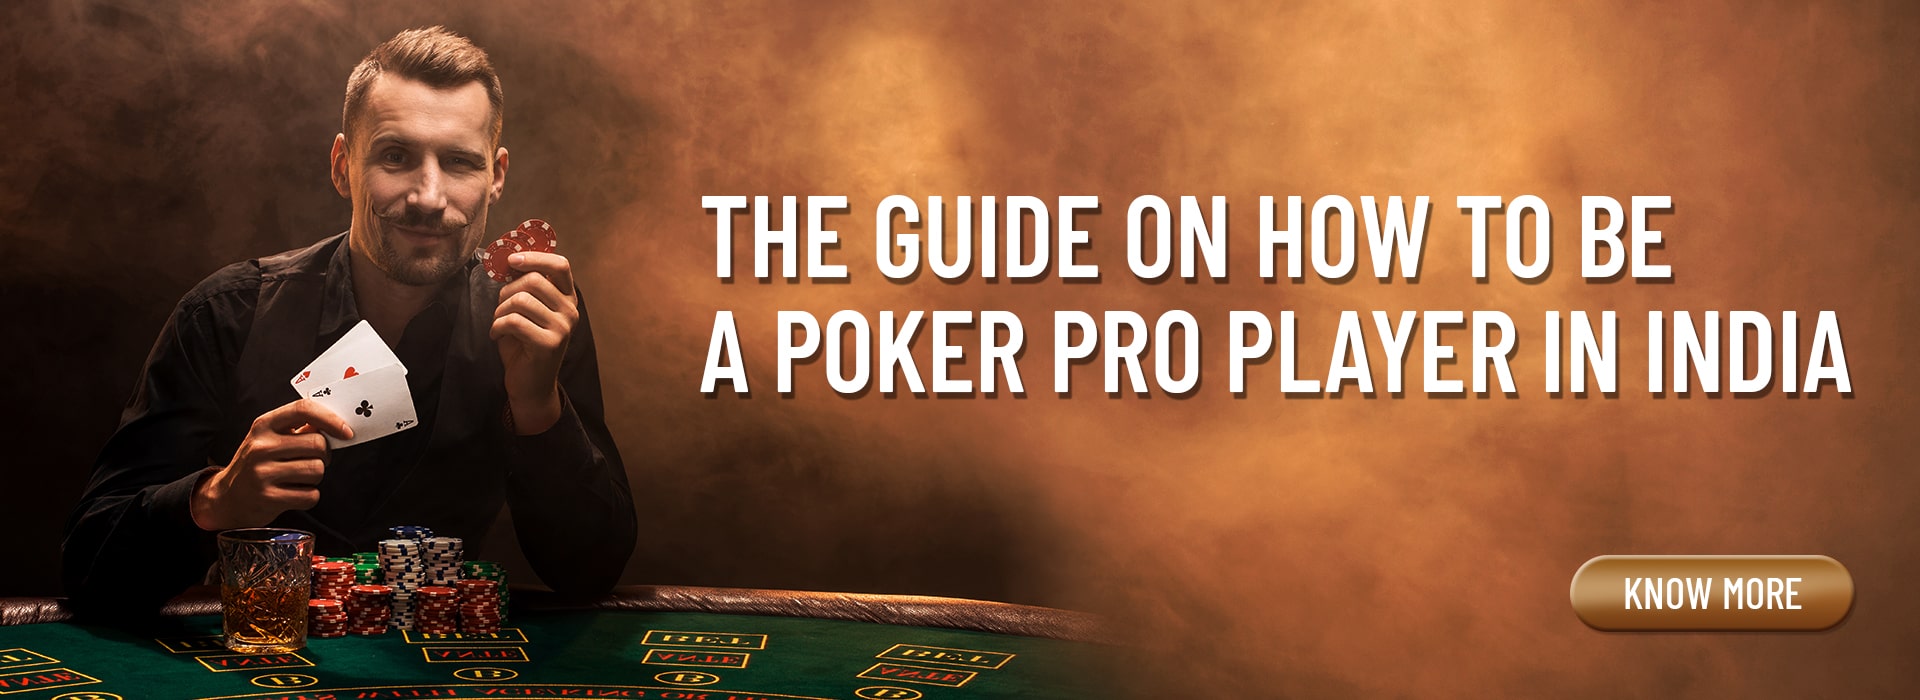 How to be a poker pro player in India